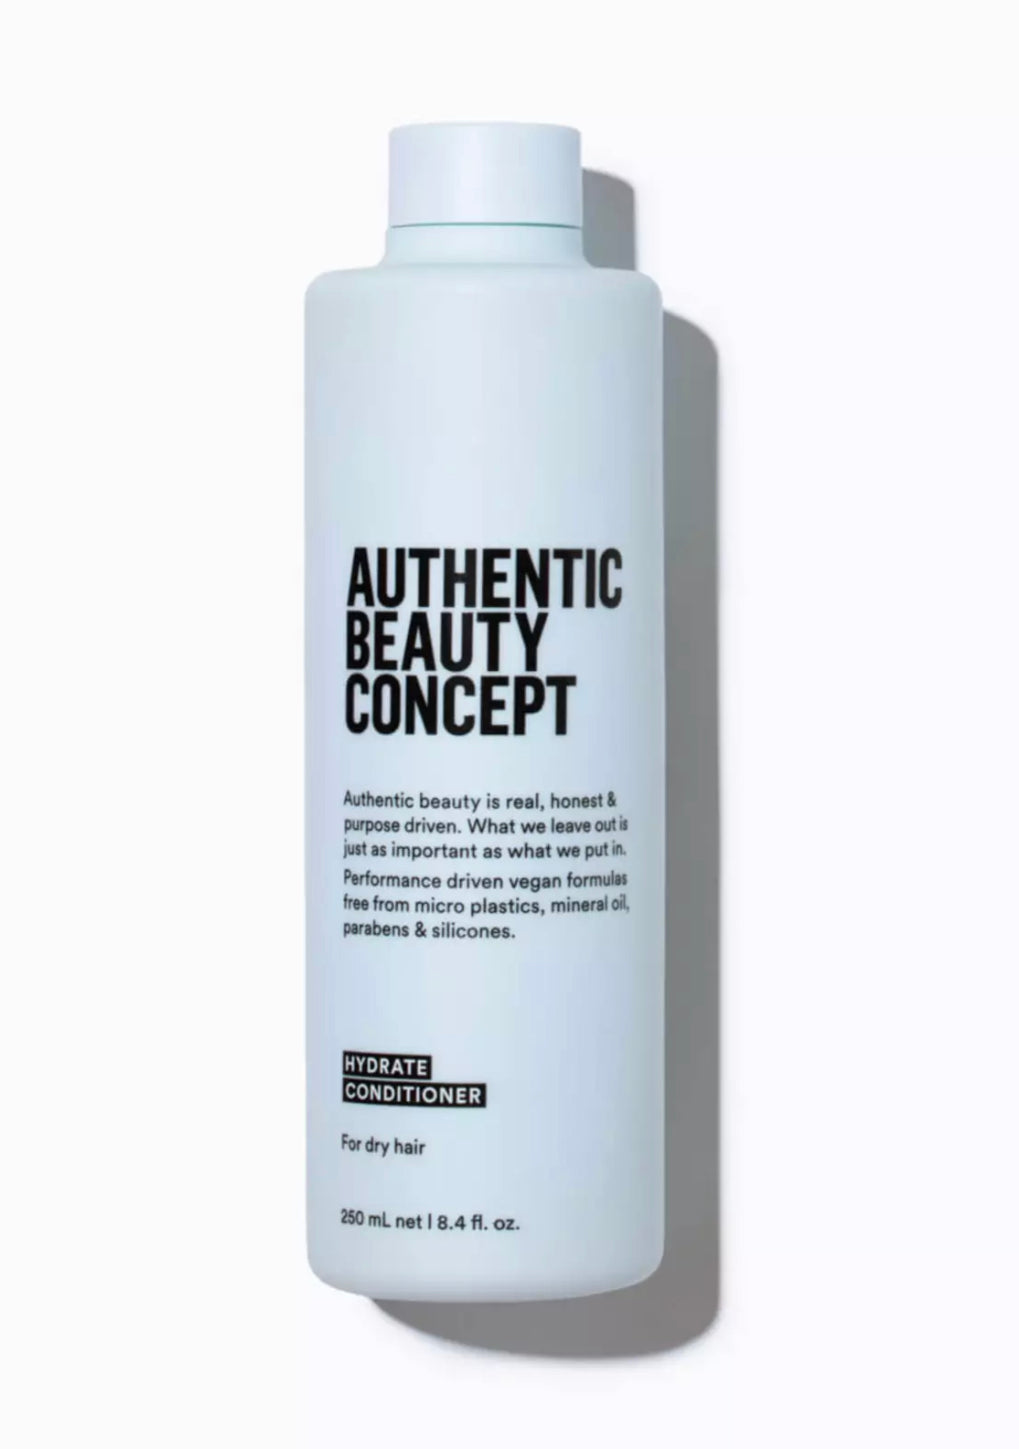 Authentic Beauty Concept hydrate conditioner